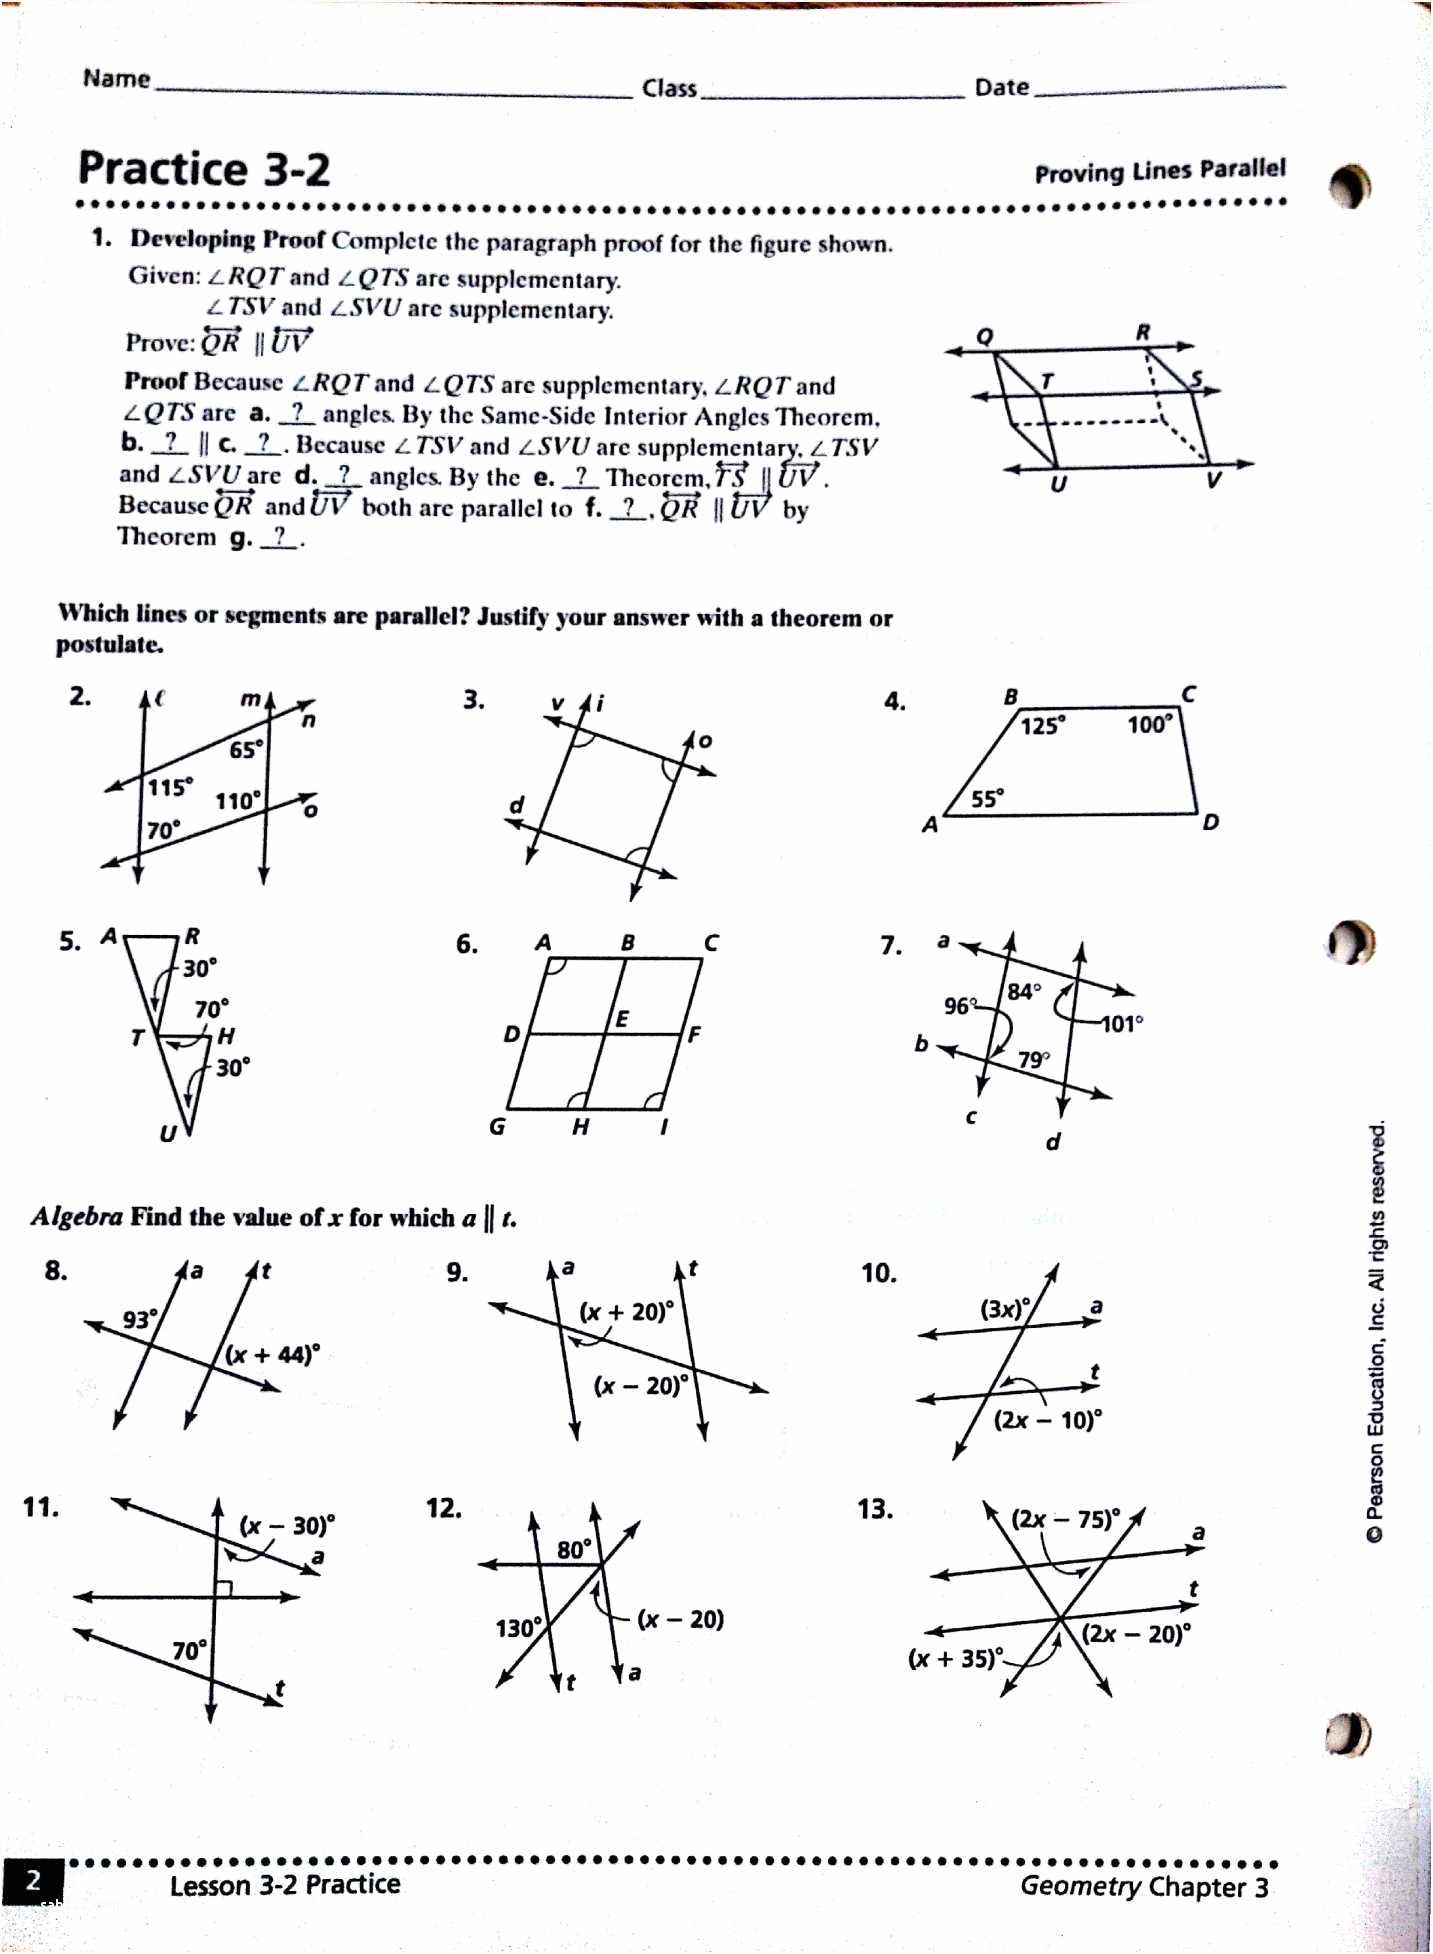 Special Right Triangles Worksheet Answer Key with Work Also Document Design Ideas All About Document Design Ideas